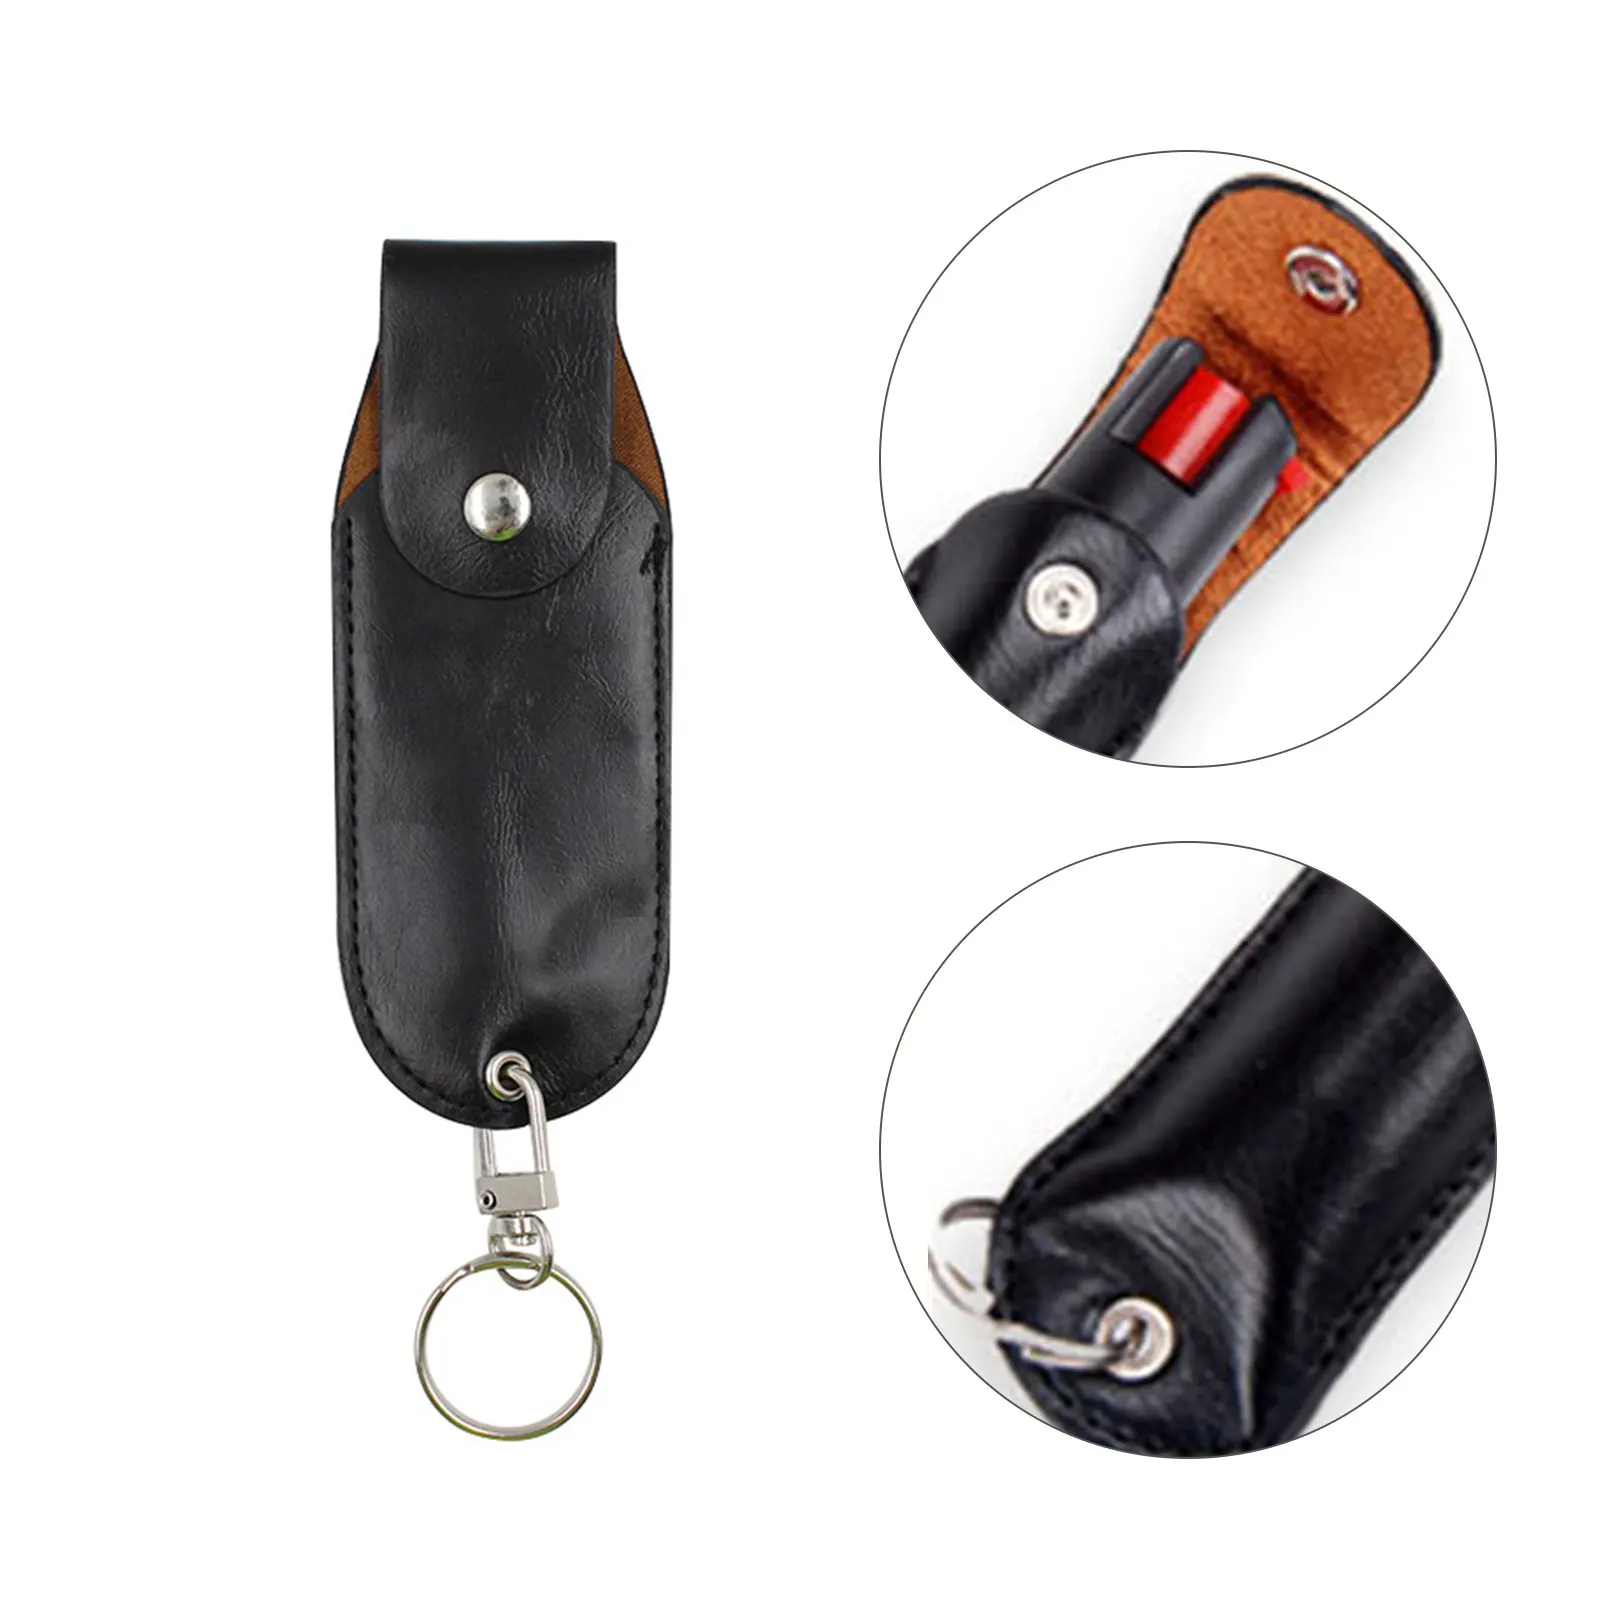 OC Pepper Spray Holder Pouch Leather Case For MK3 Canister